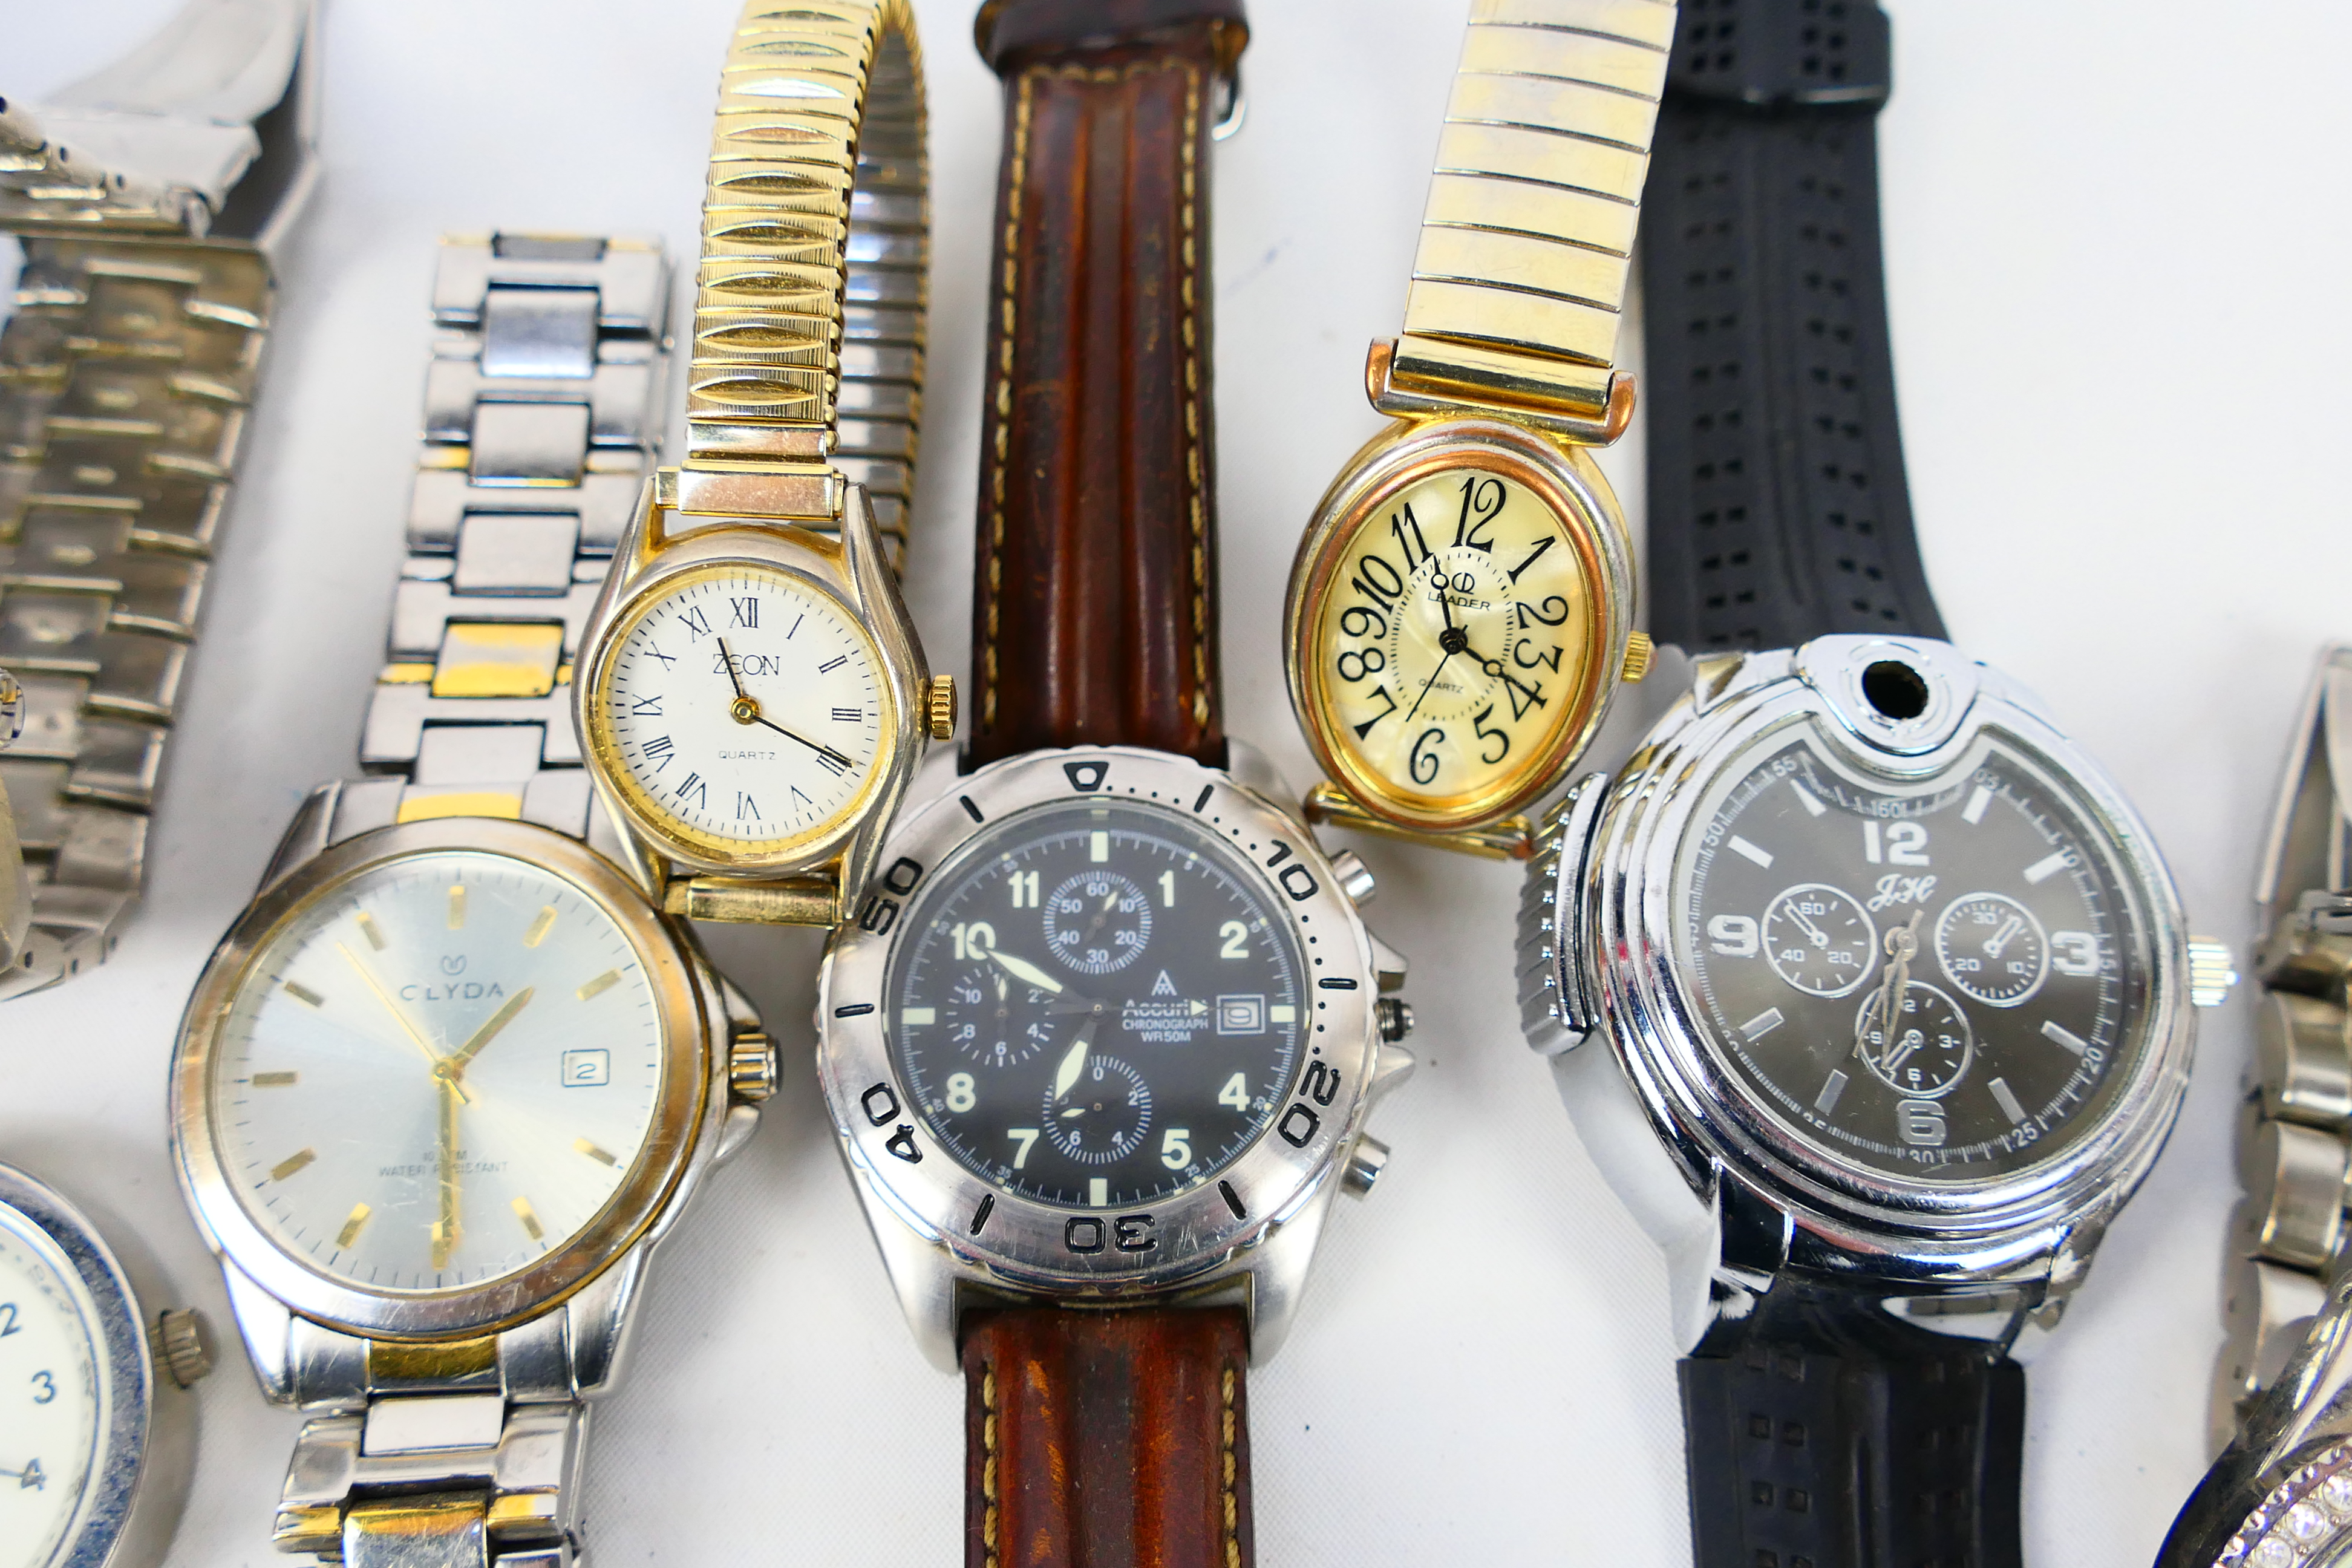 A collection of various wrist watches to include Zeon, Sekonda, Clyda and other. - Image 5 of 6